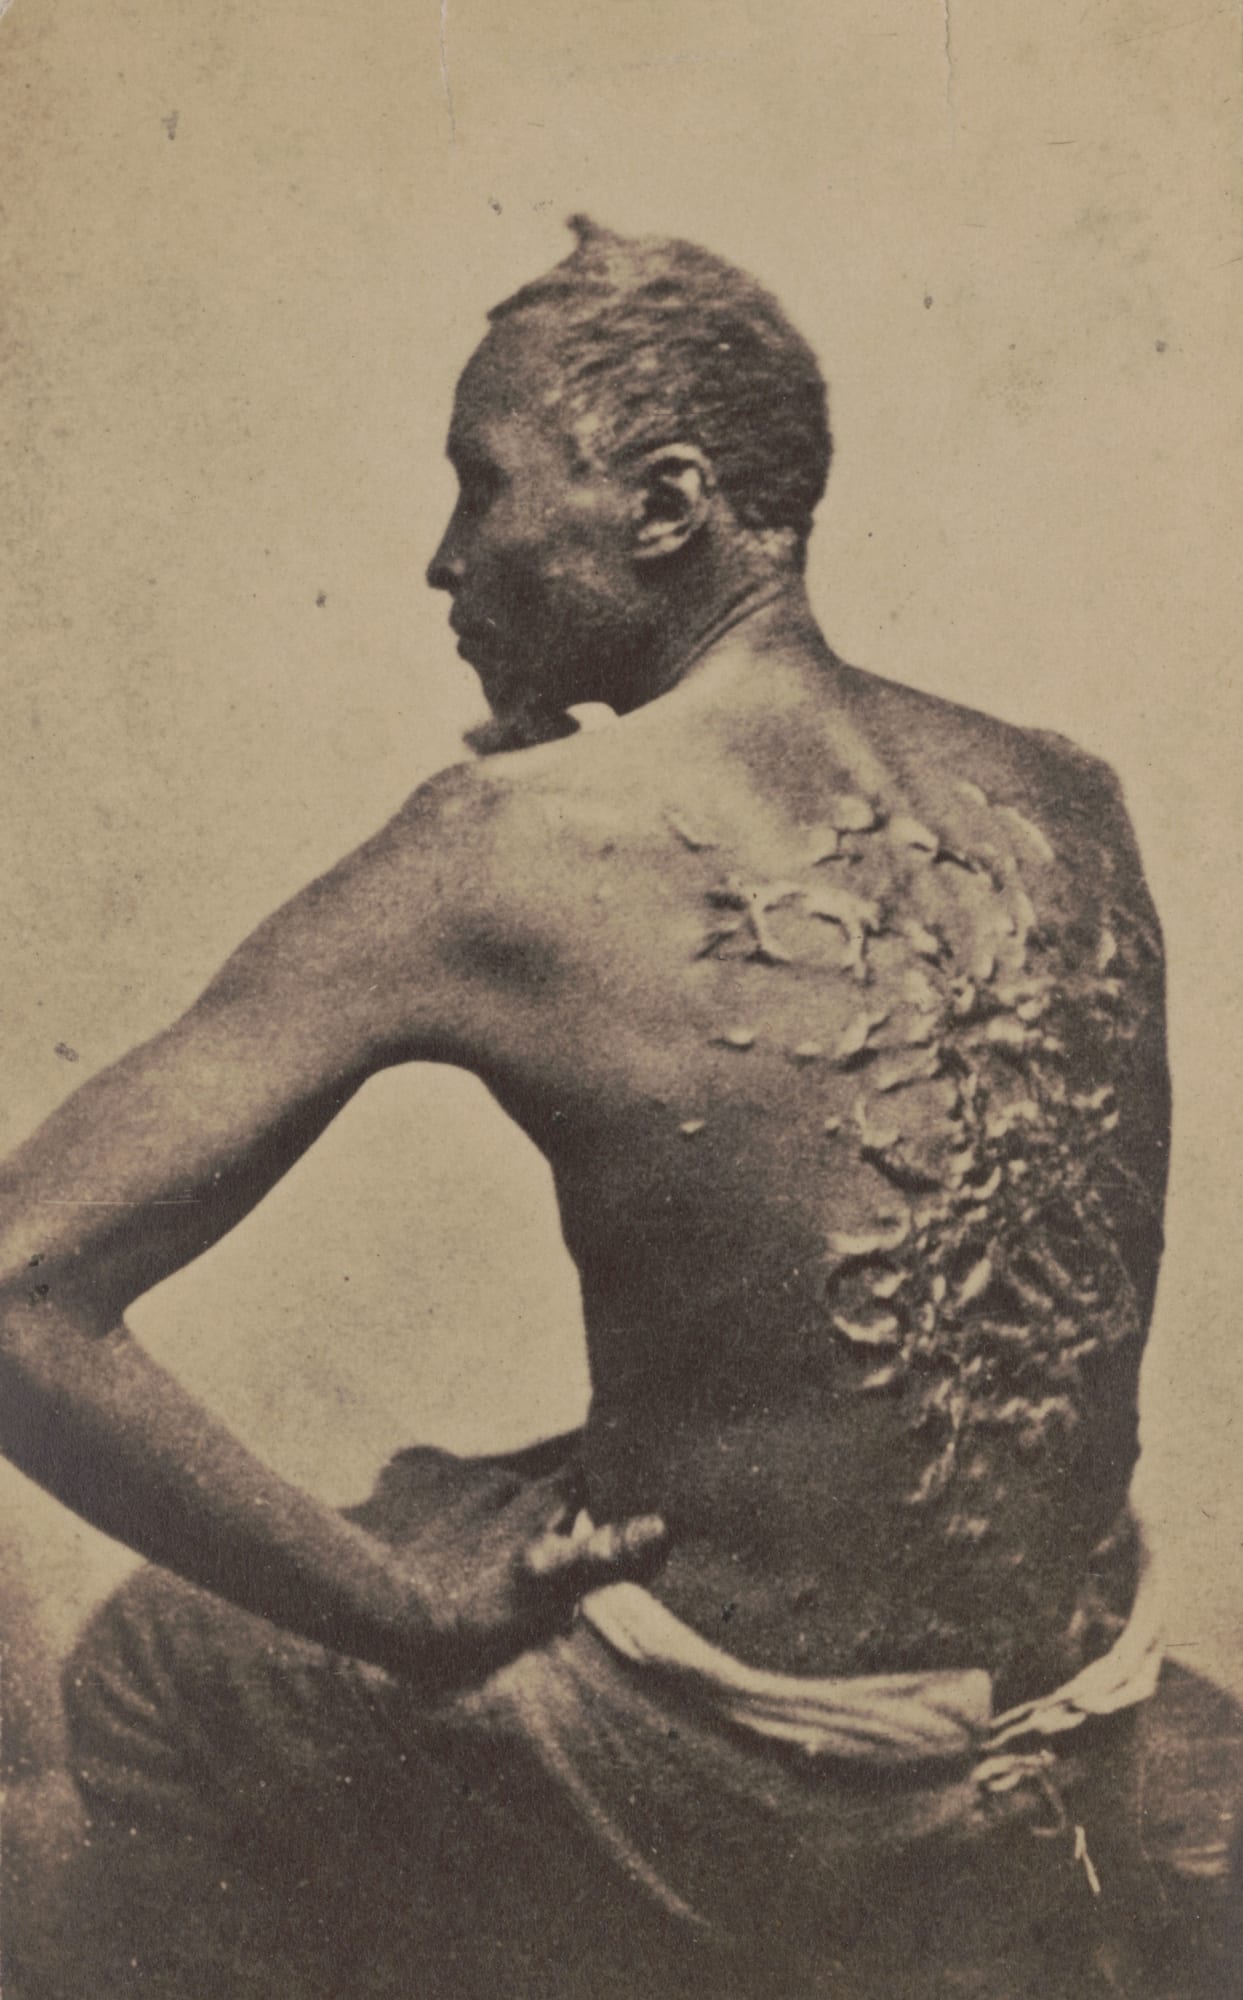 Picture of slave with whip scars